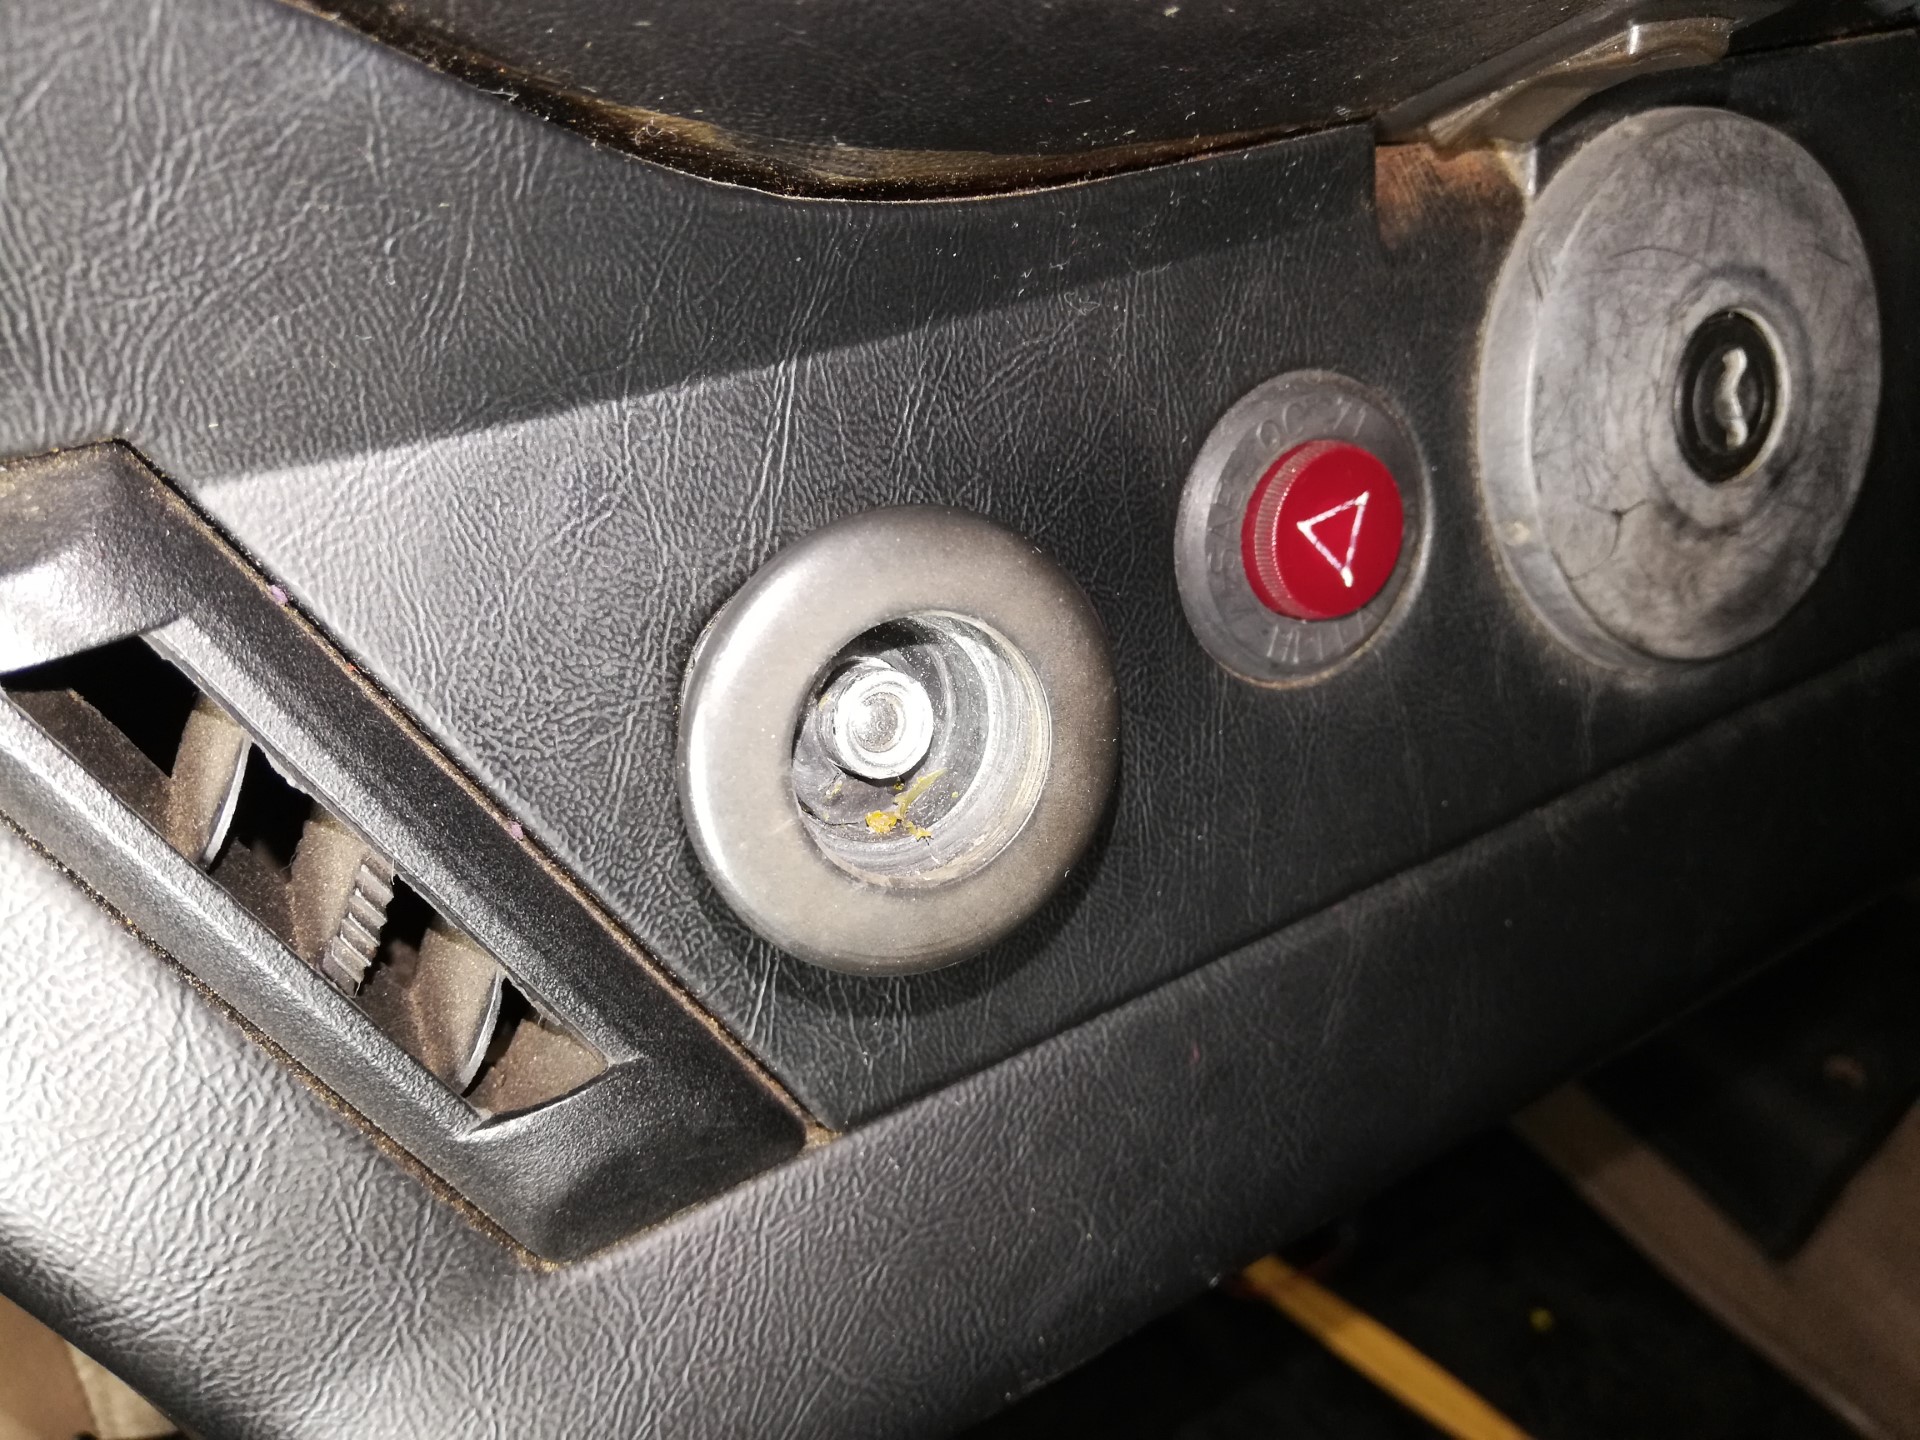 Air-cooled Porsche 911 headlight switch removal.